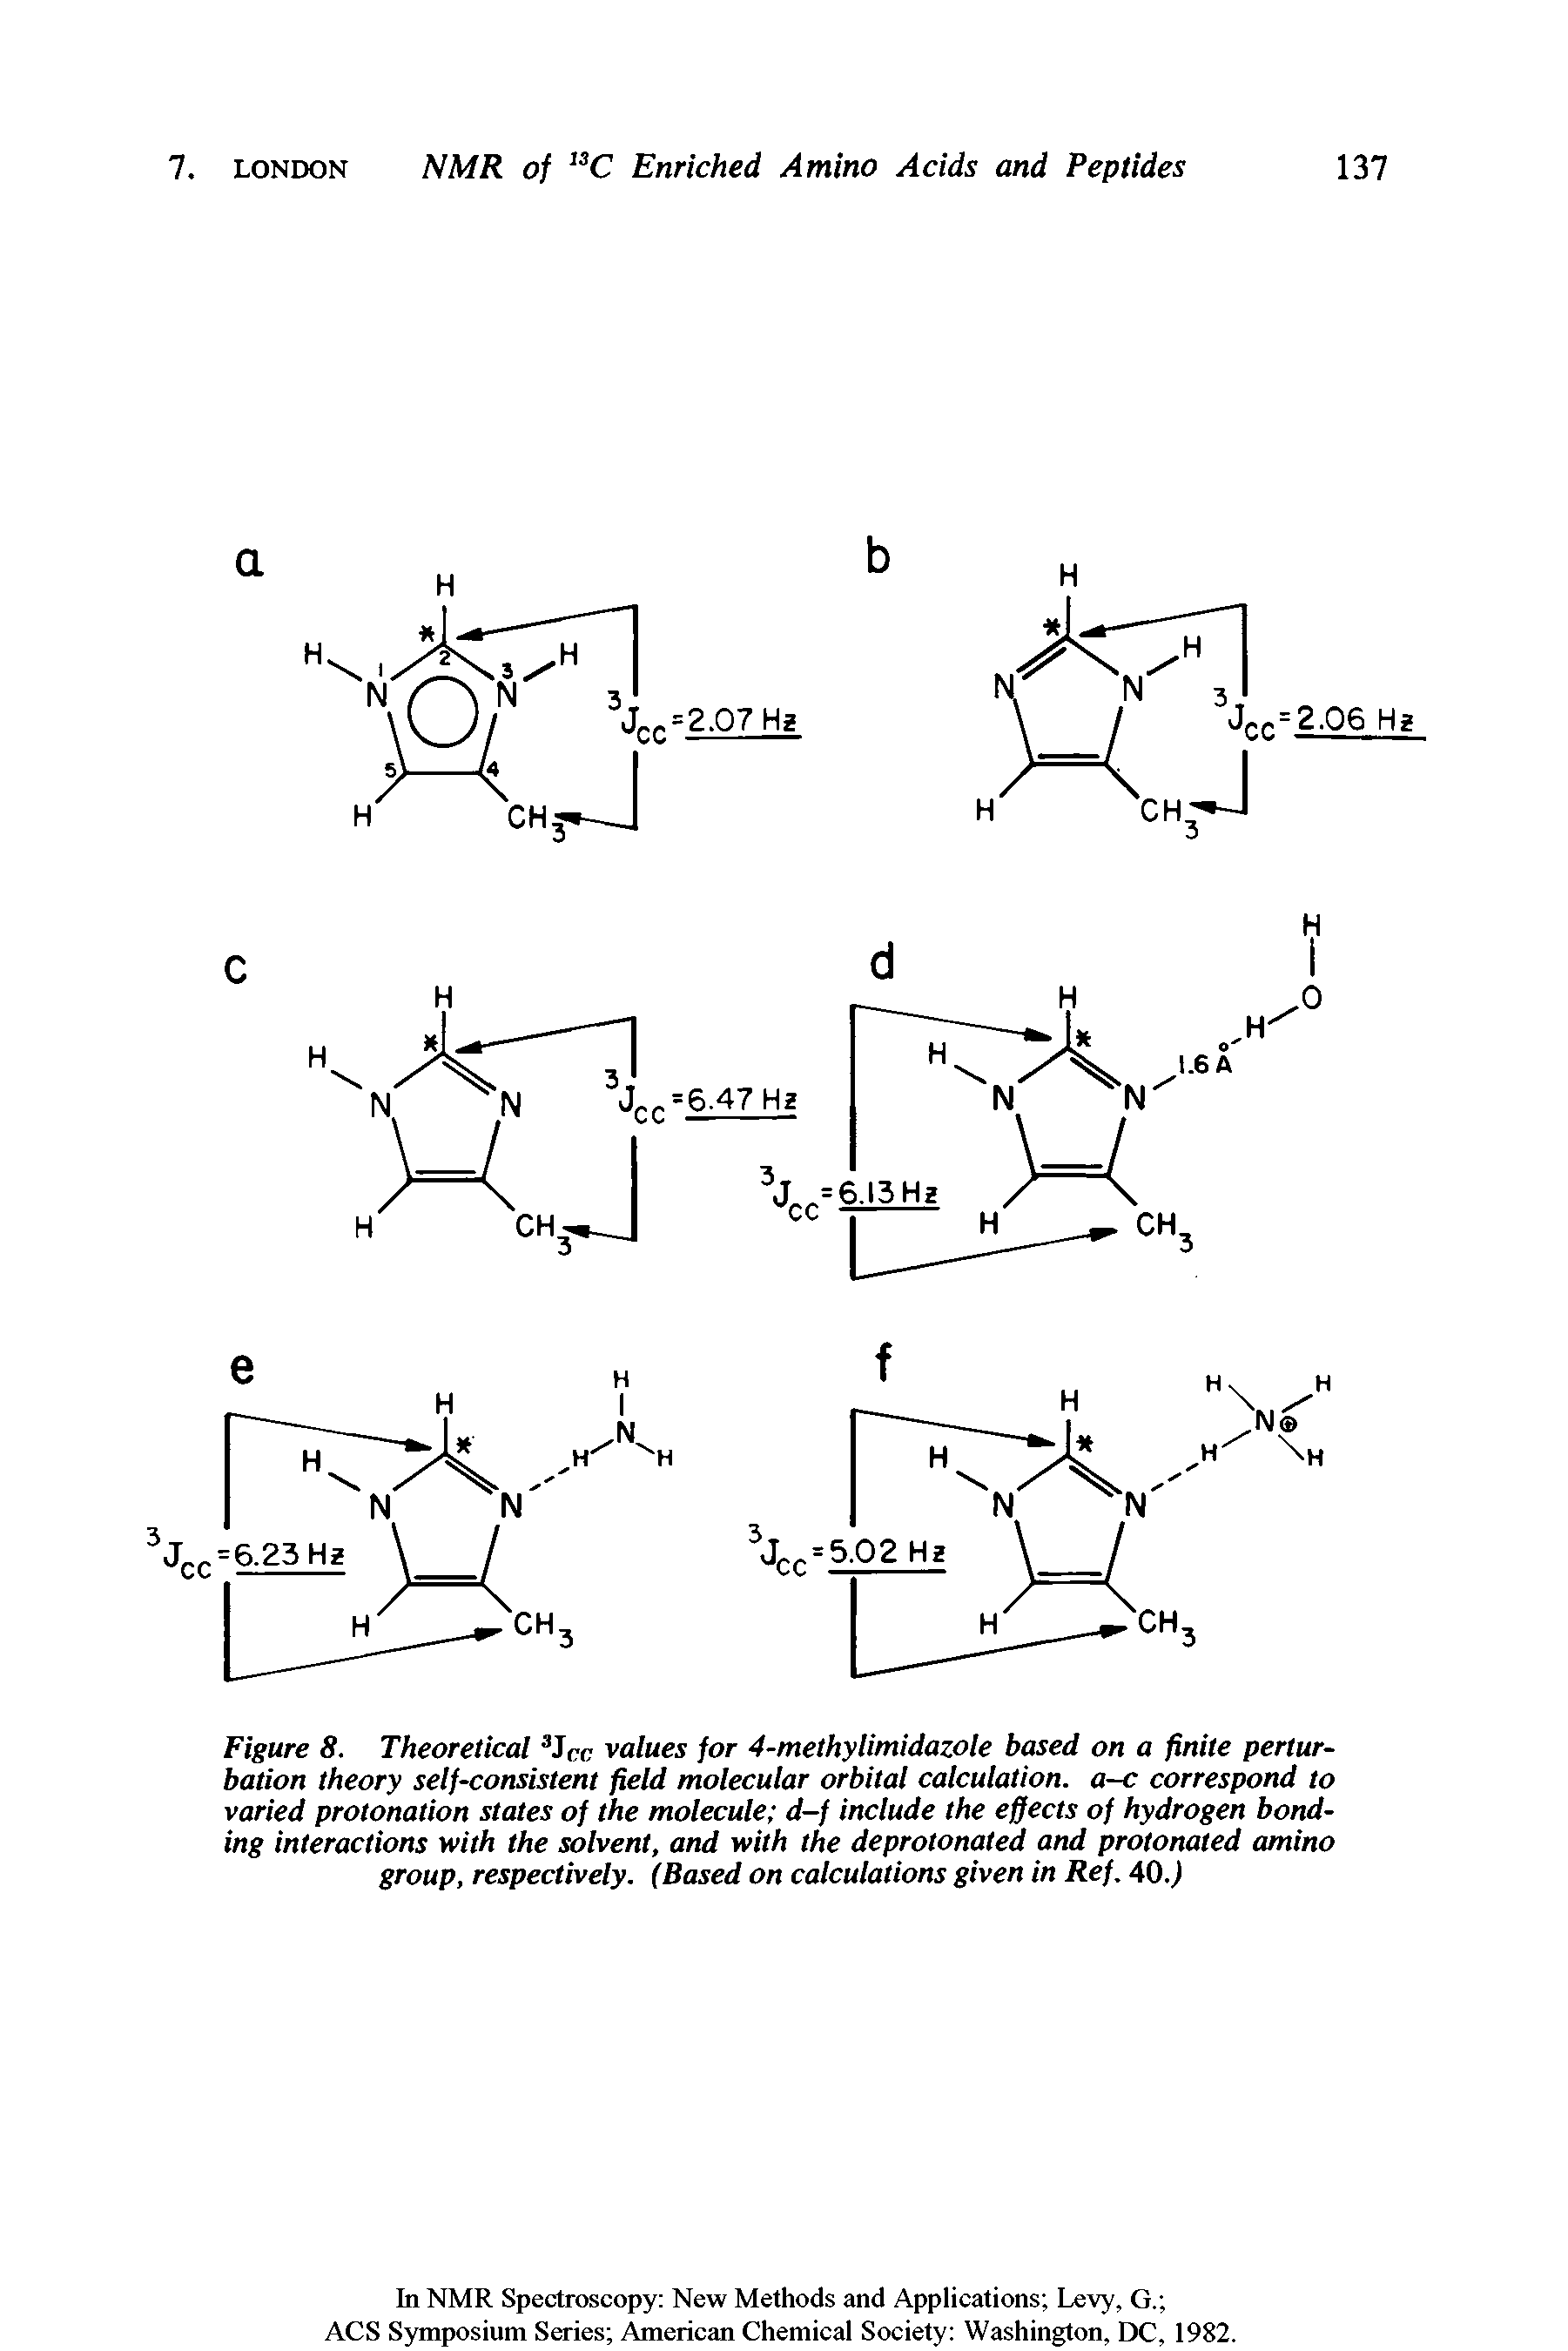 Figure 8. Theoretical Jcc values for 4-methylimidazole based on a finite perturbation theory self-consistent field molecular orbital calculation, a-c correspond to varied protonation states of the molecule d-f include the effects of hydrogen bonding interactions with the solvent, and with the deprotonated and protonated amino group, respectively. (Based on calculations given in Ref. 40.)...